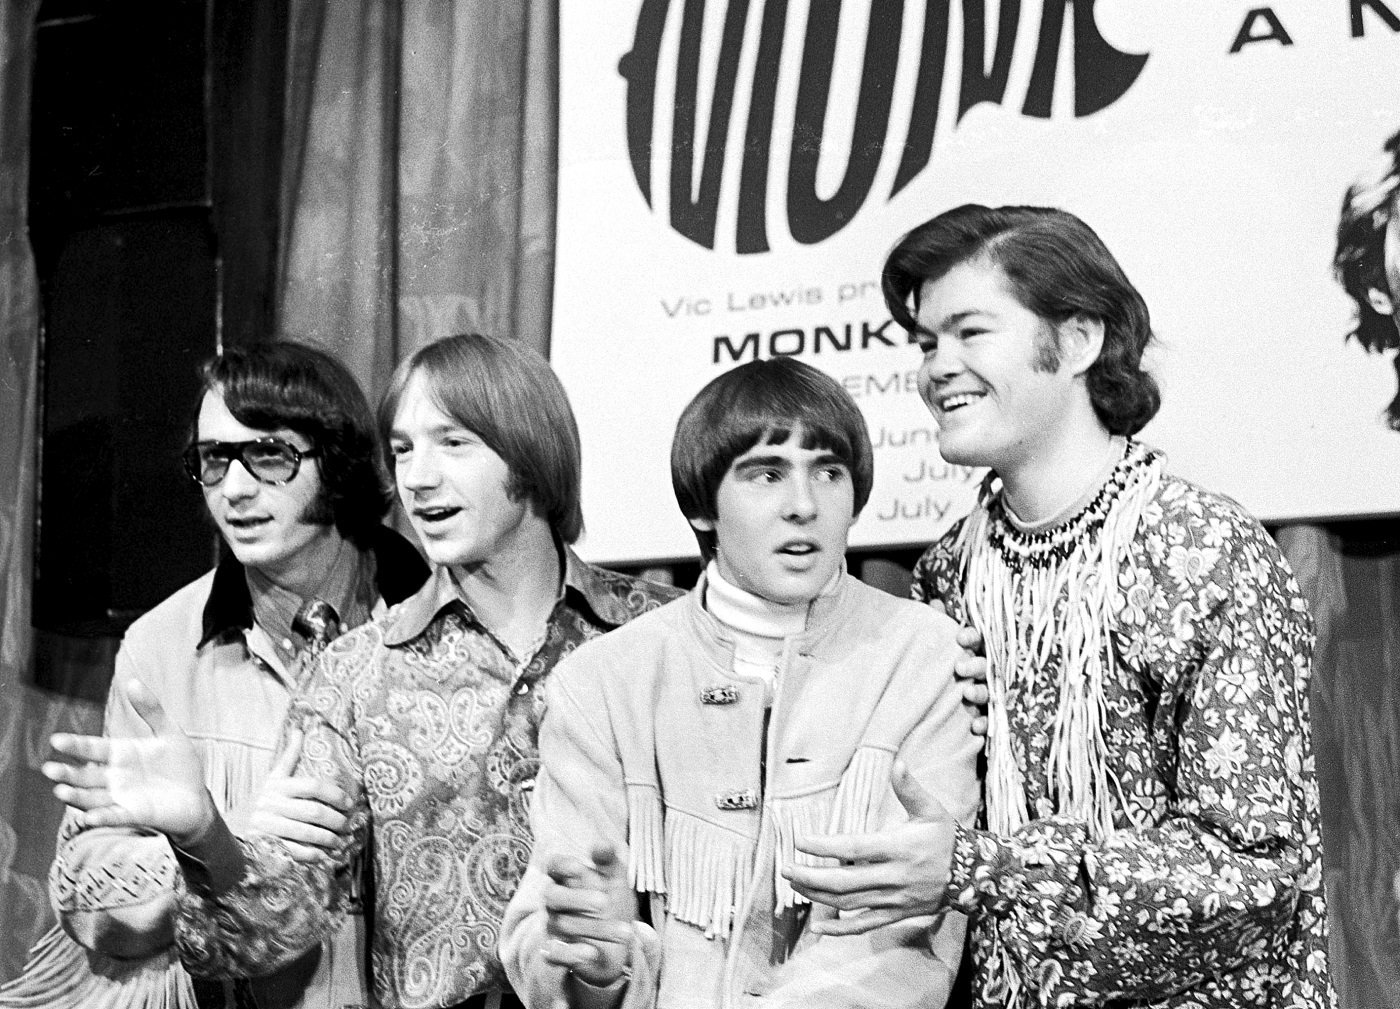 A black-and-white photo of Mike Nesmith, Peter Tork, Davy Jones, and Mickey Dolenz of The Monkees